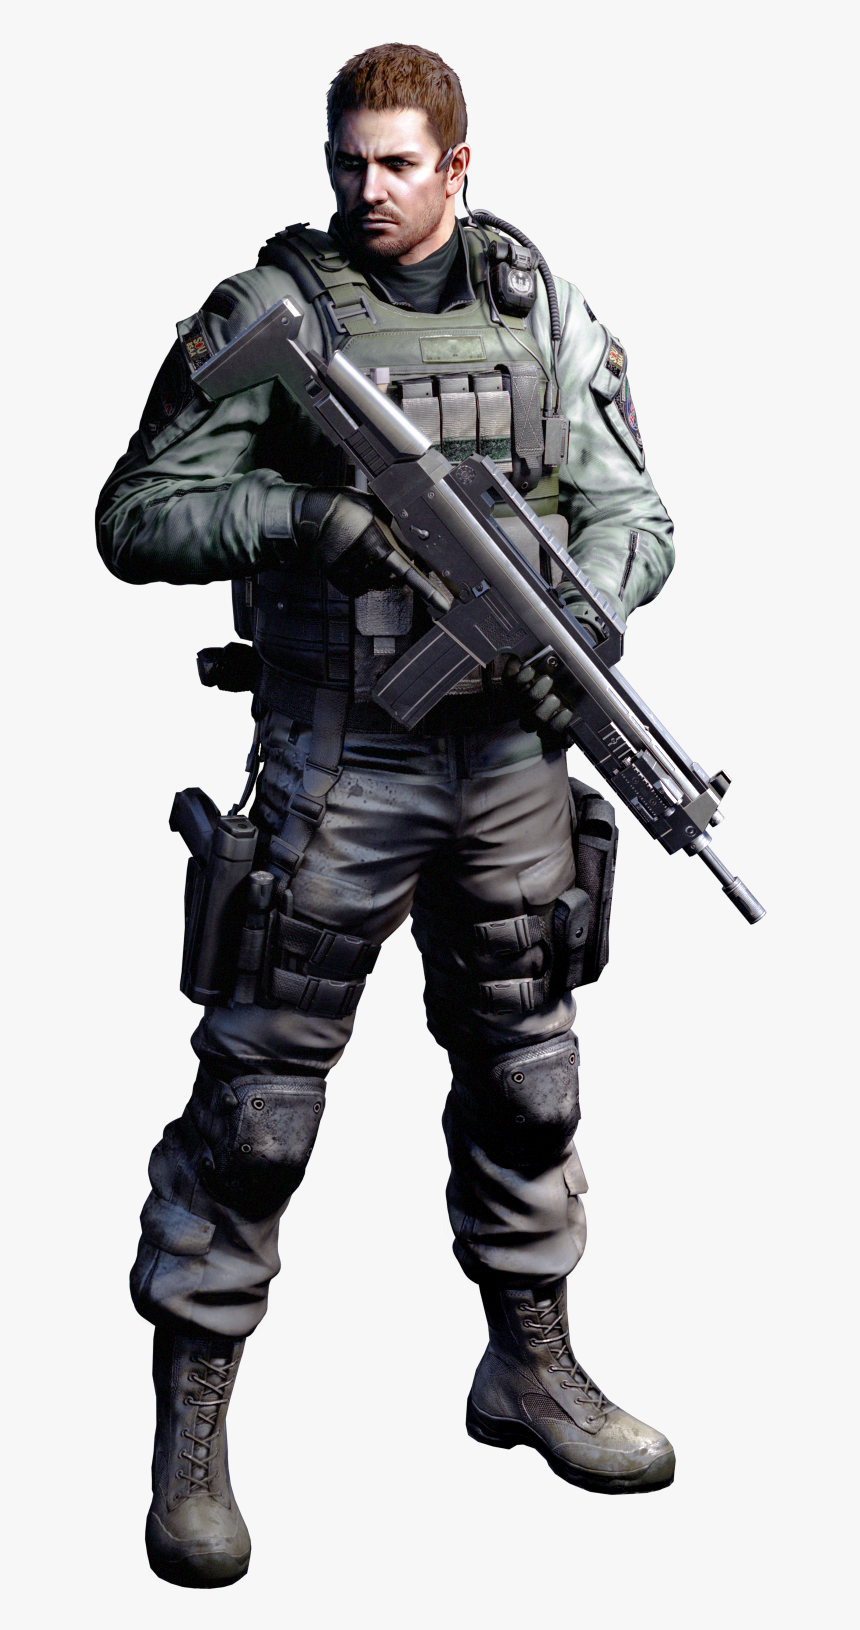 Chris Redfield - Chris Redfield Resident Evil 6 Png, Transparent Png, Free Download